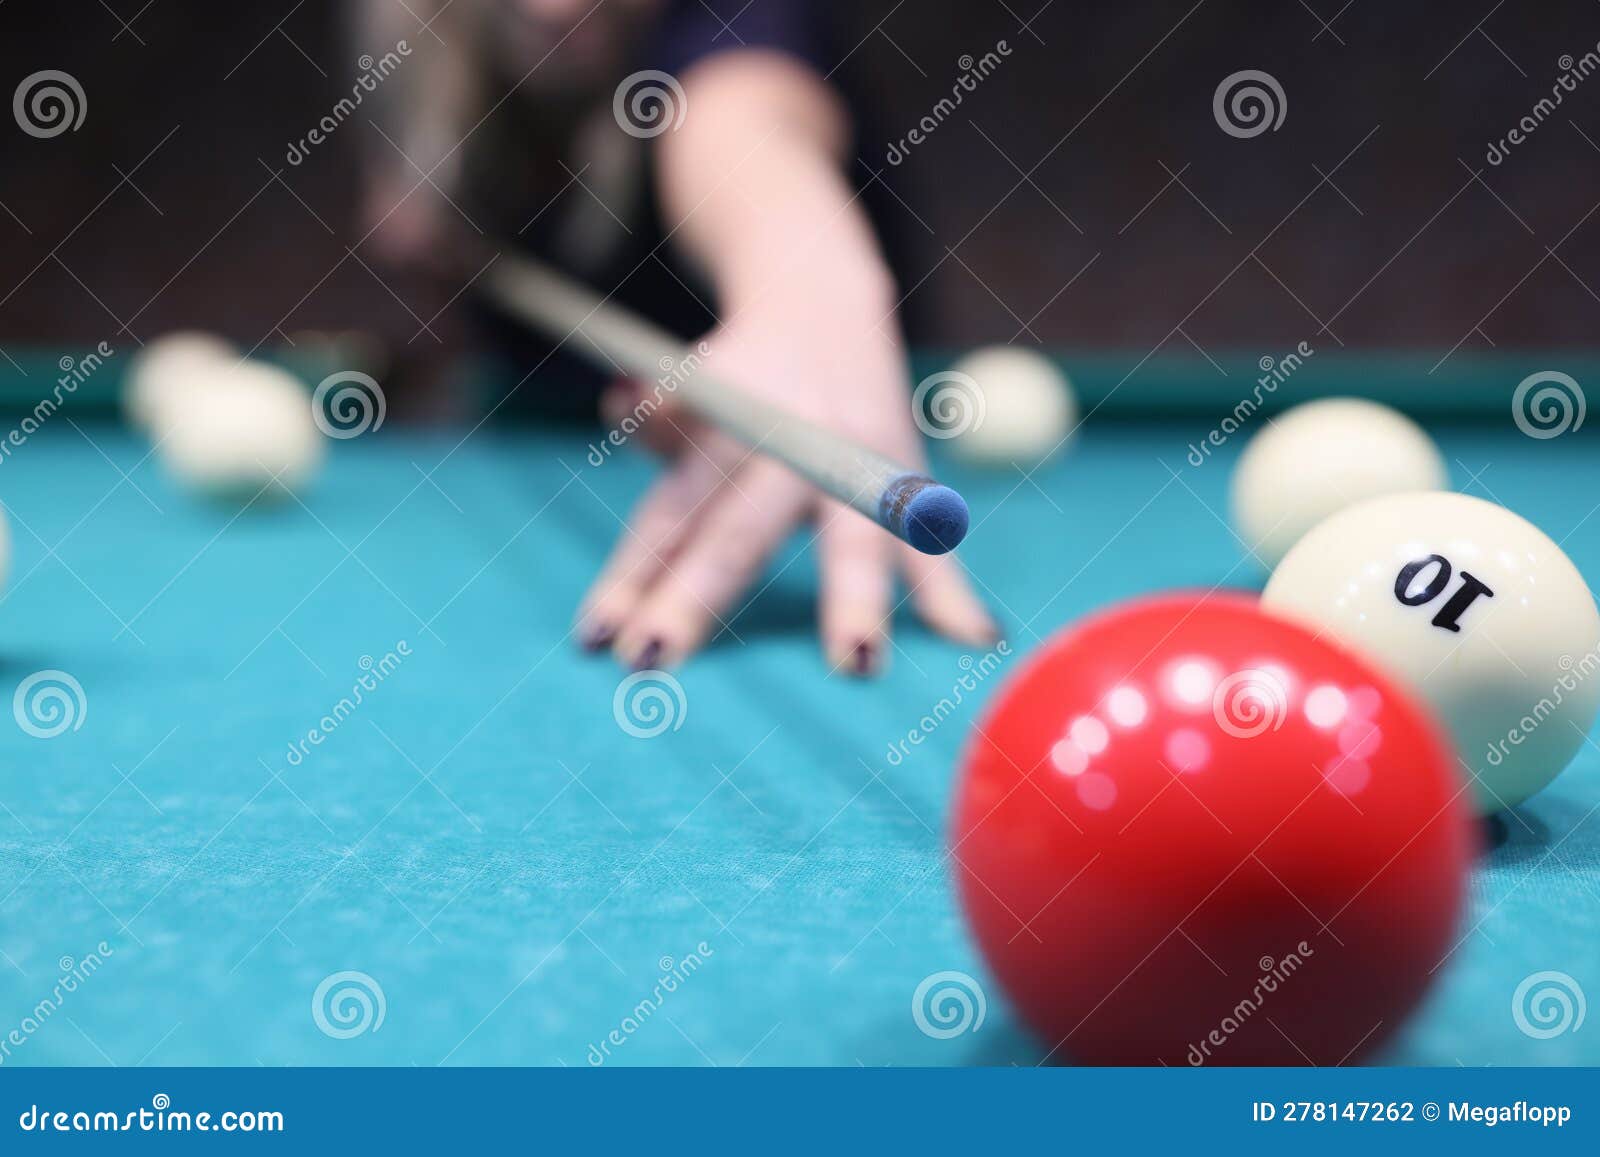 venturous woman ready to hit red ball on blue pool table